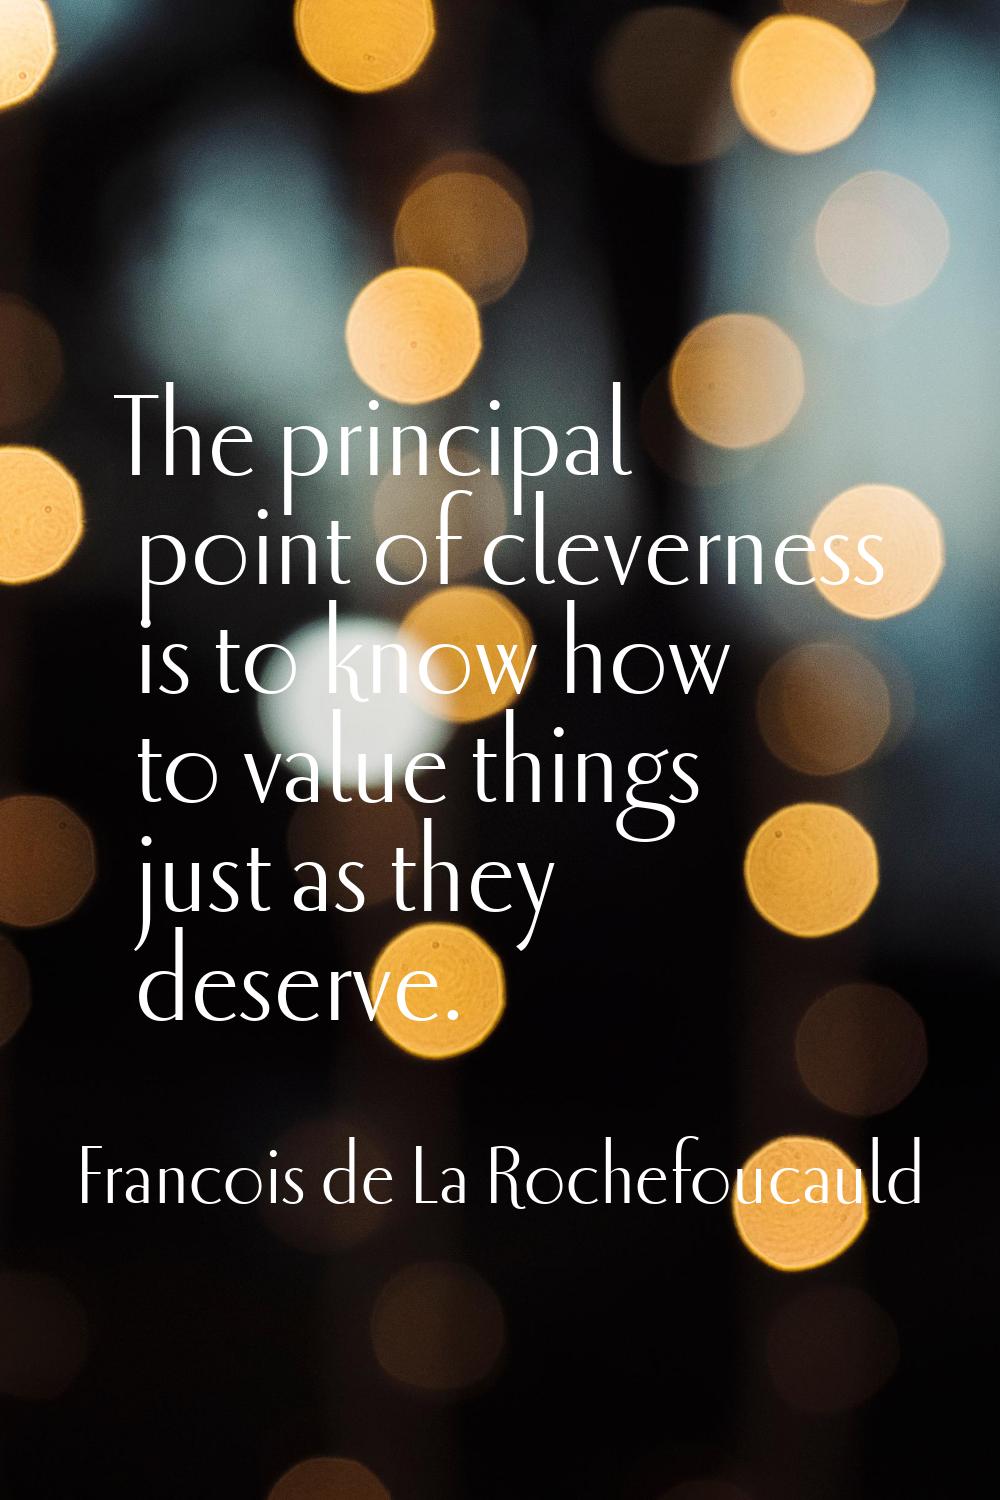 The principal point of cleverness is to know how to value things just as they deserve.